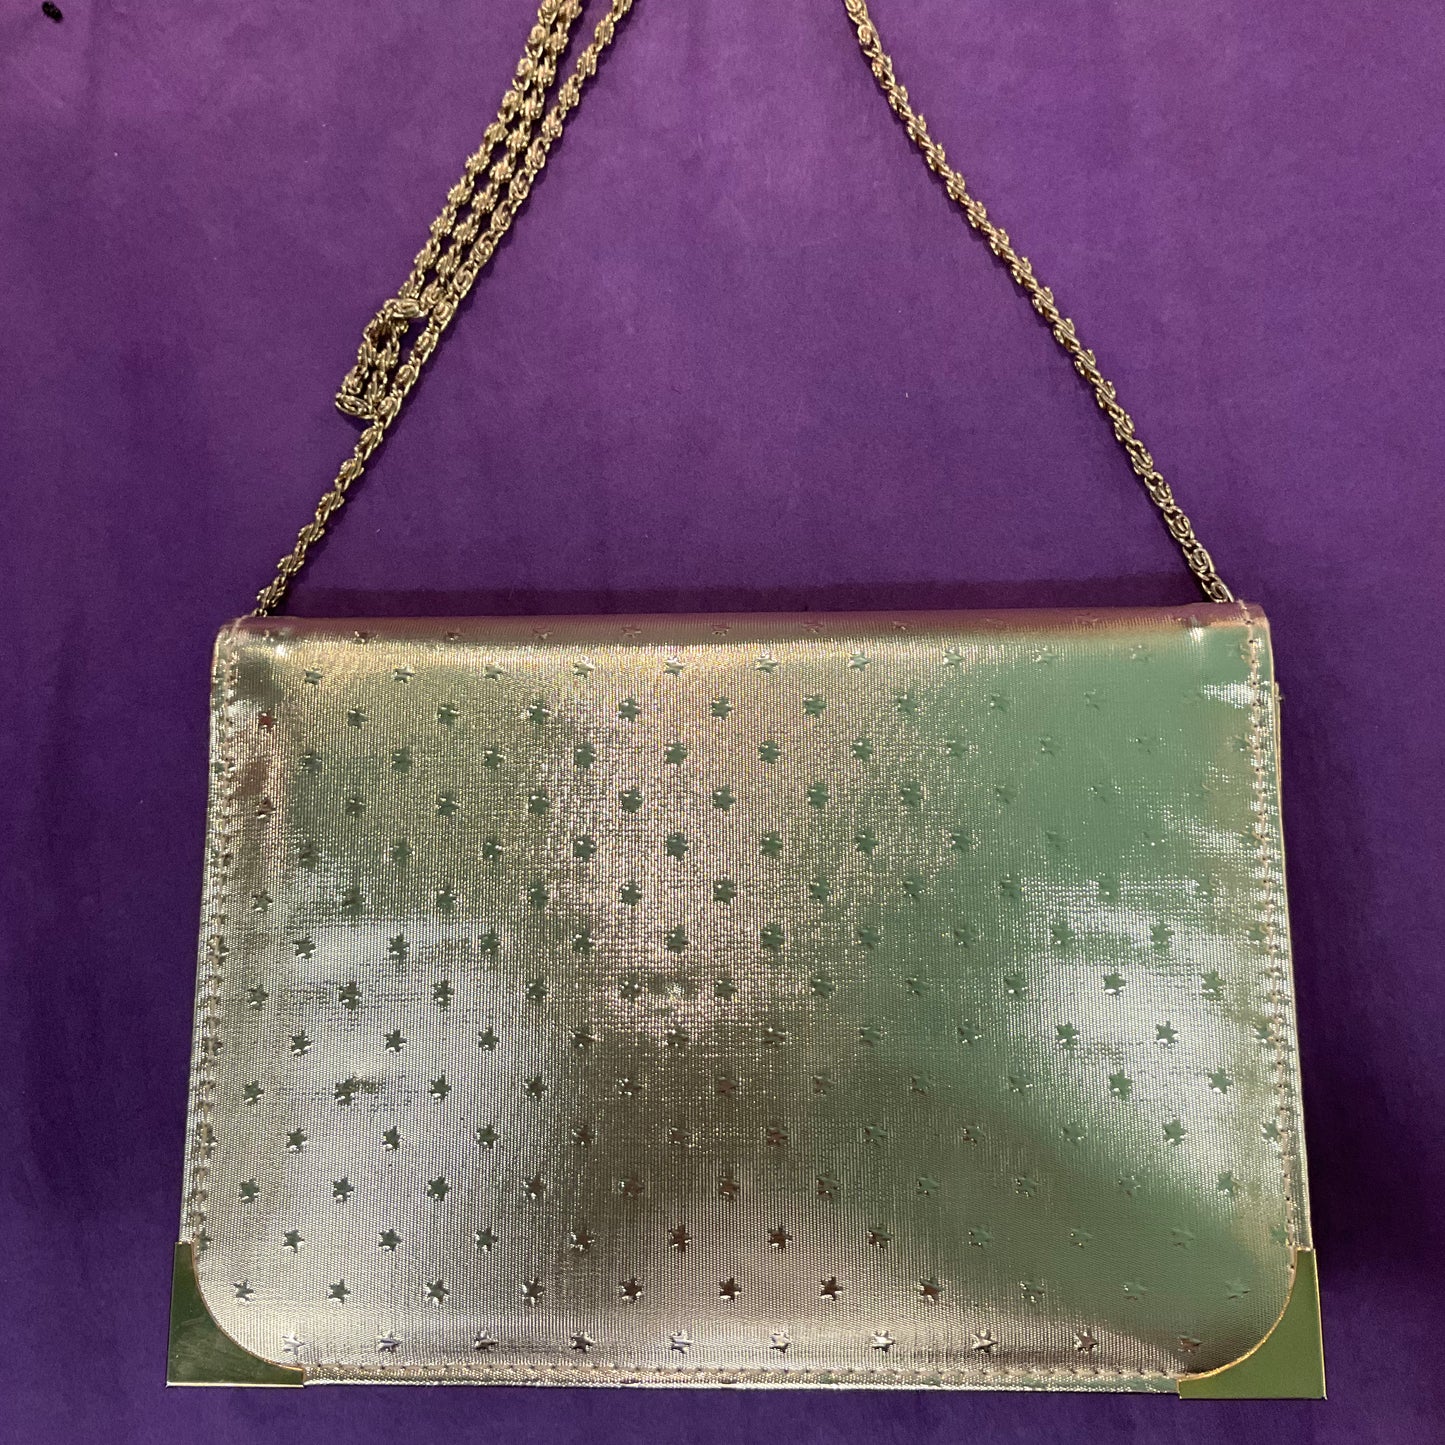 Gold ‘Star’ 1970/80s Faux Leather Evening Bag By JANETTE